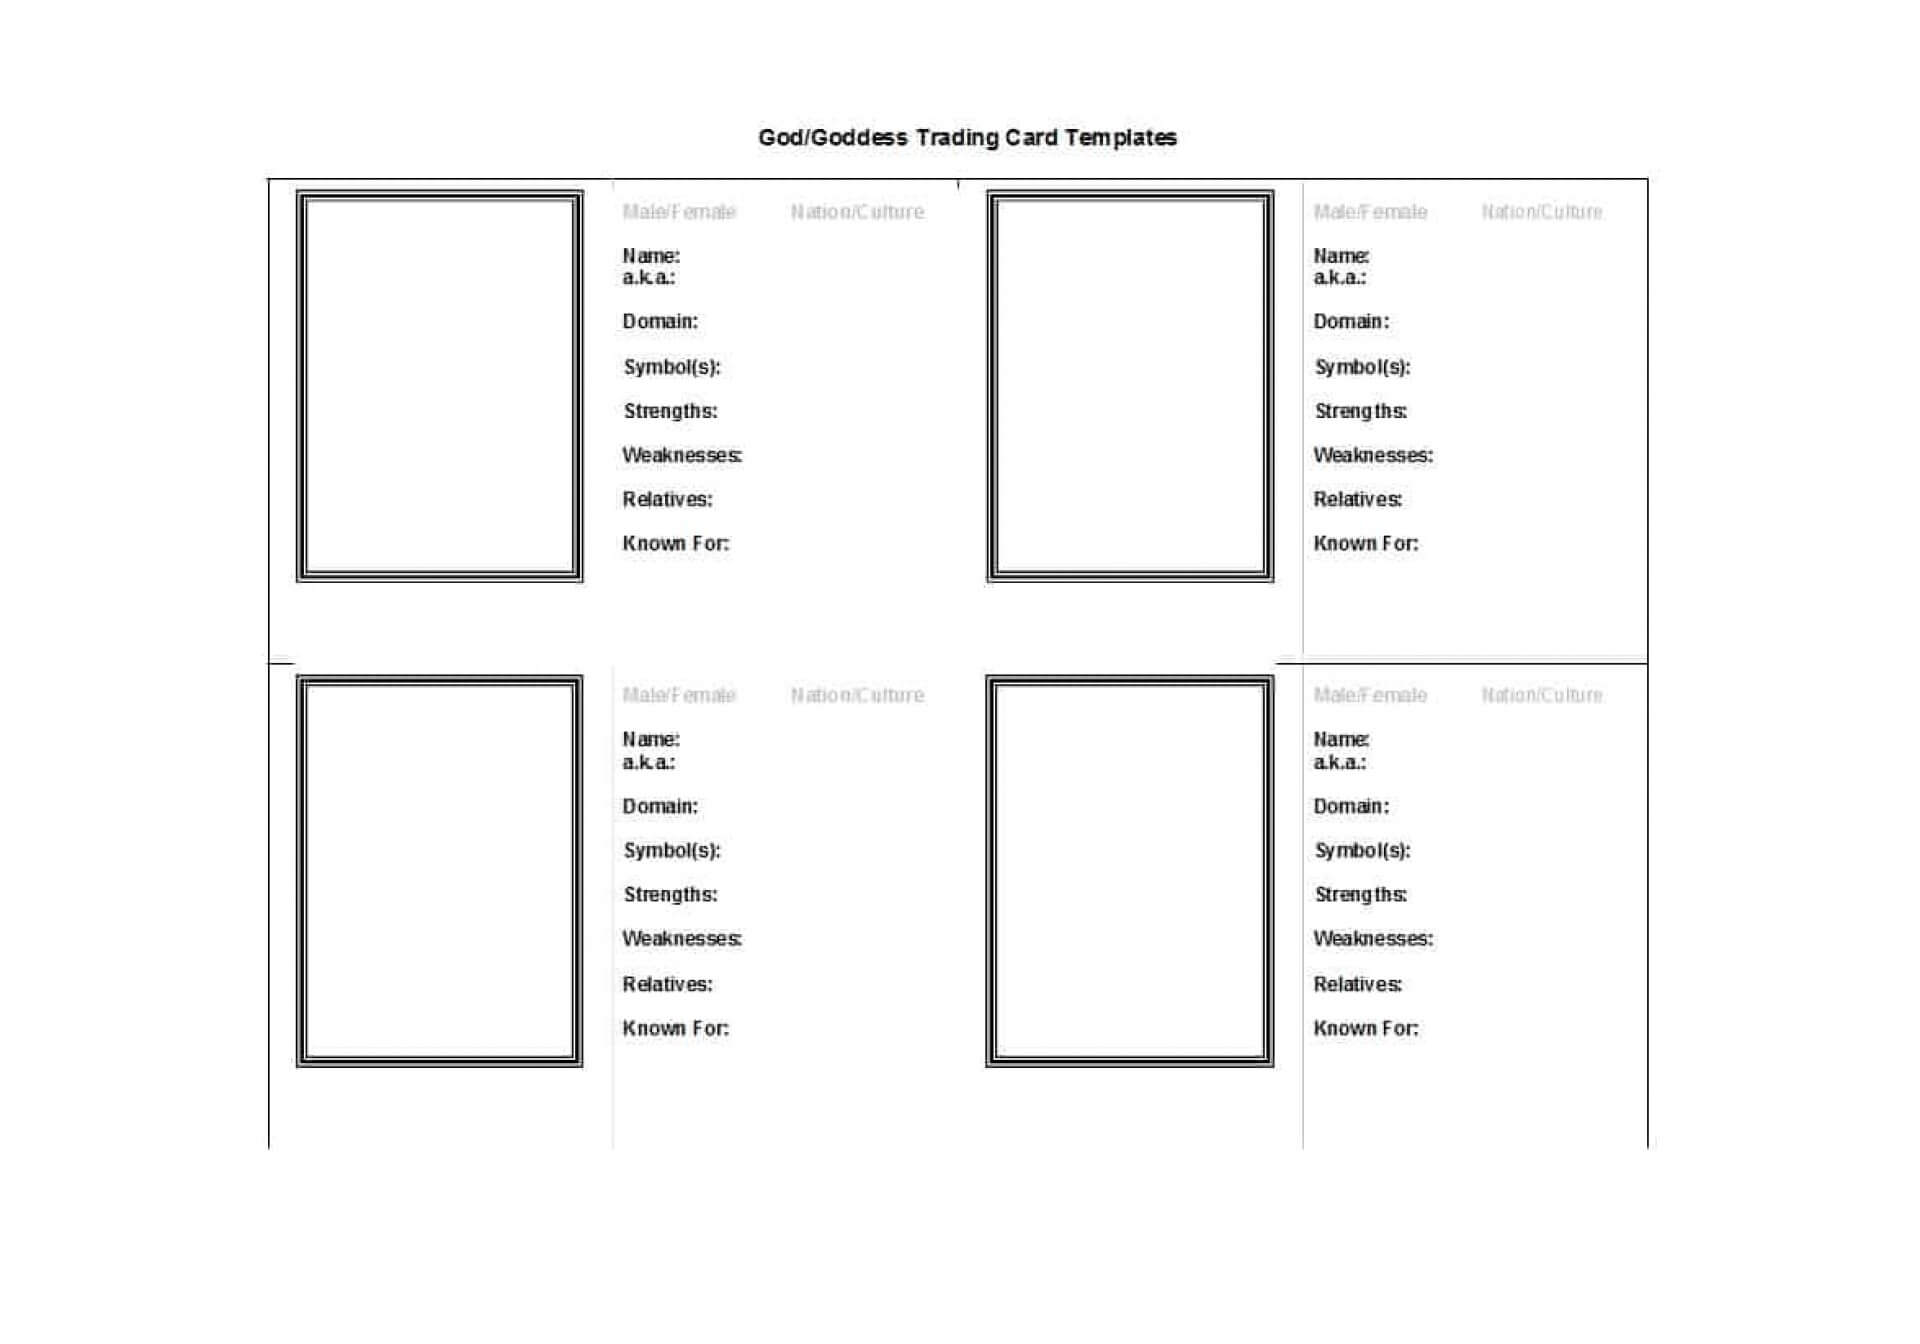 008 Baseball Trading Card Template Free Download Ideas Blank Pertaining To Free Trading Card Template Download